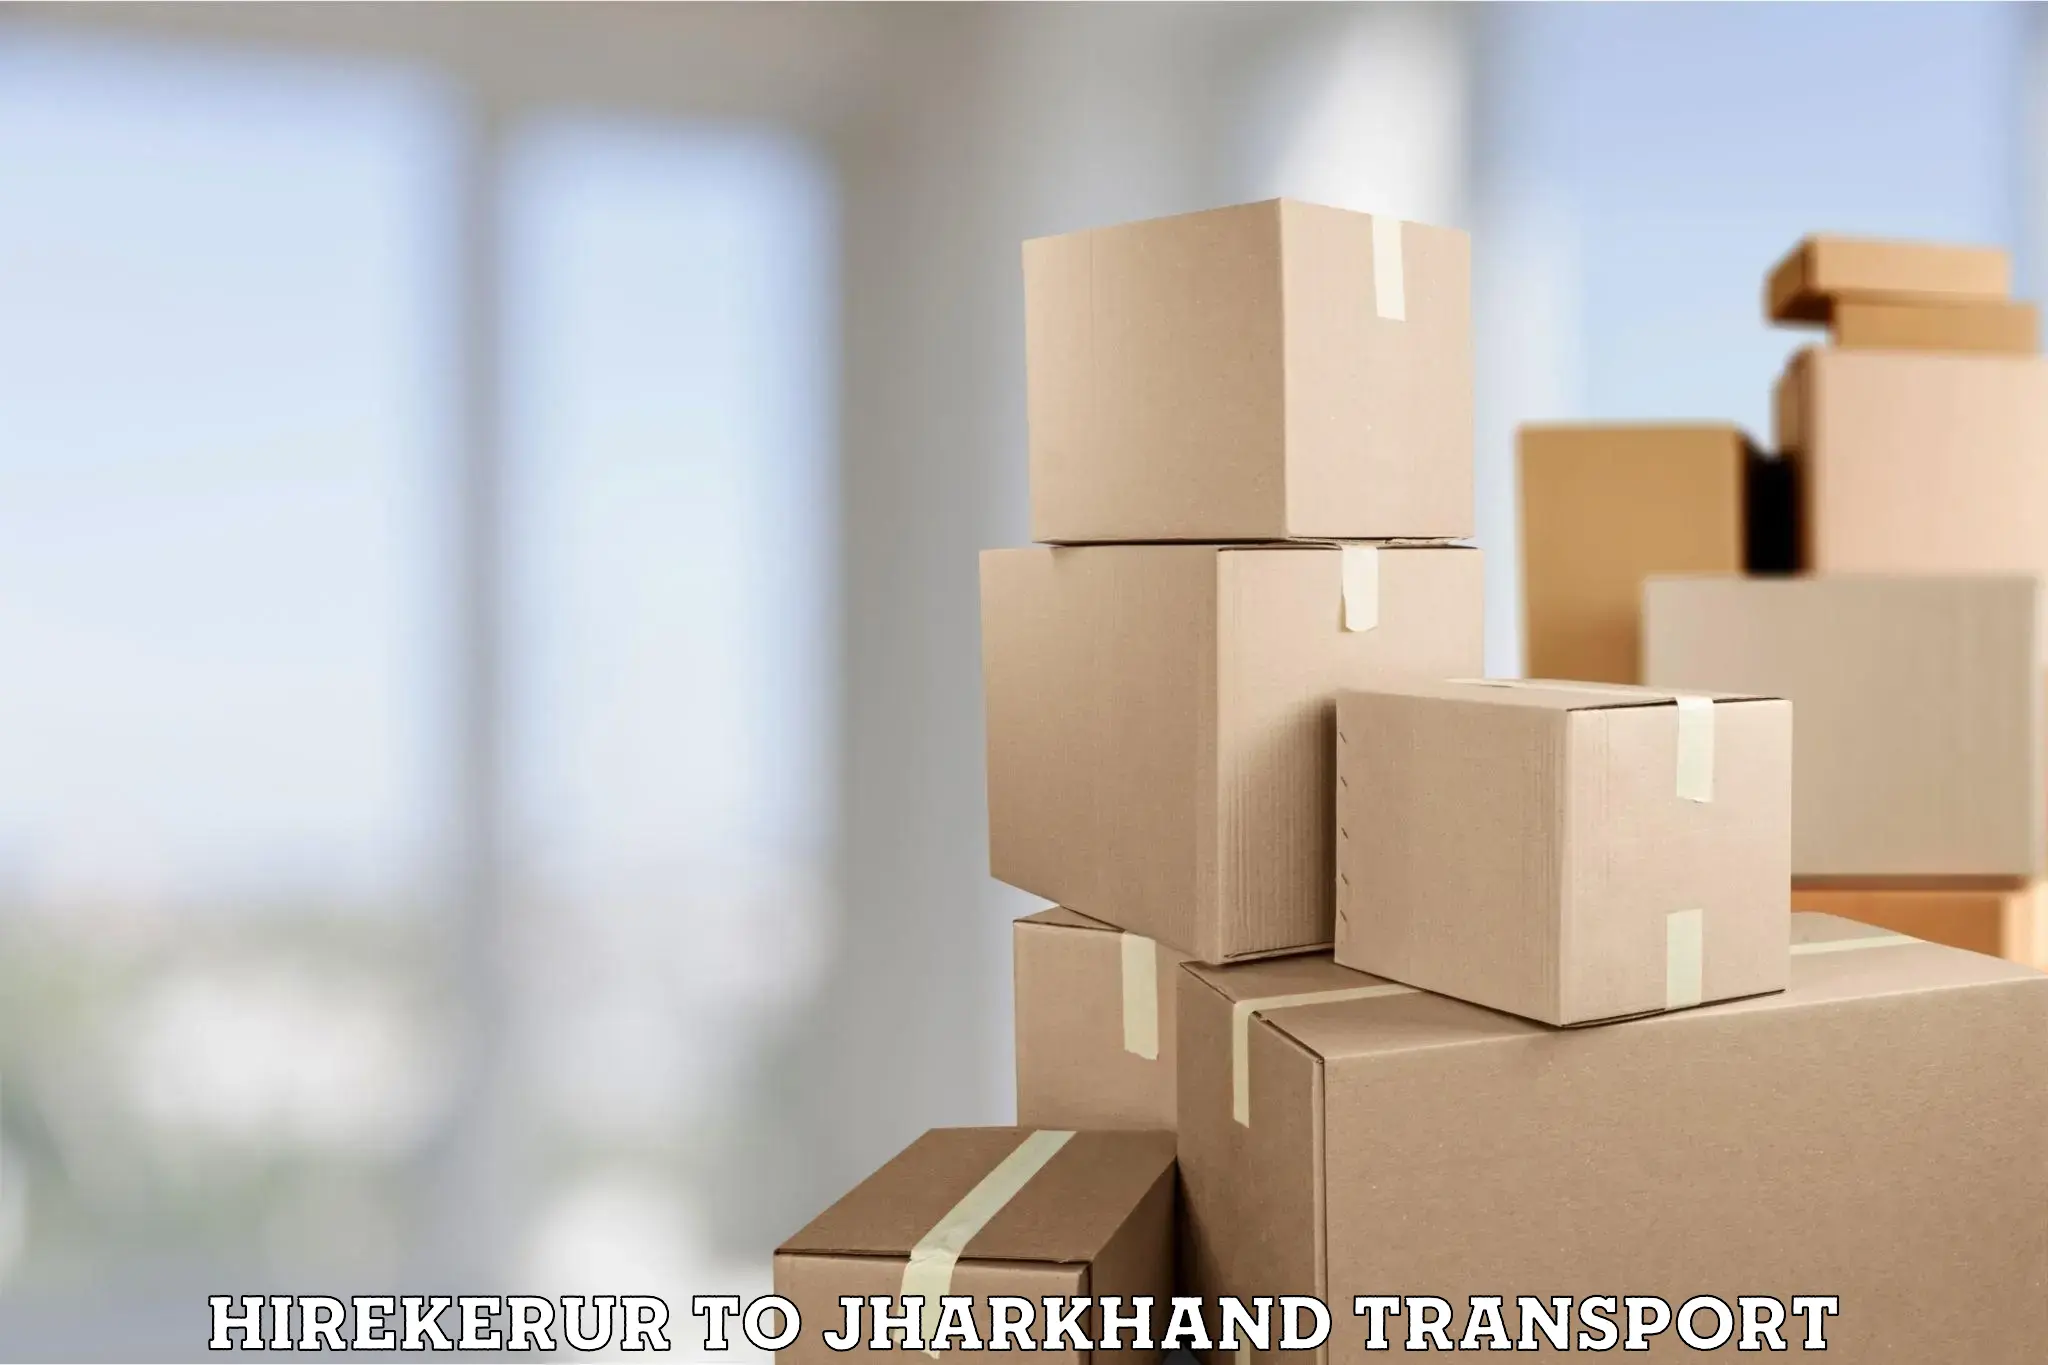 Best transport services in India Hirekerur to Giridih